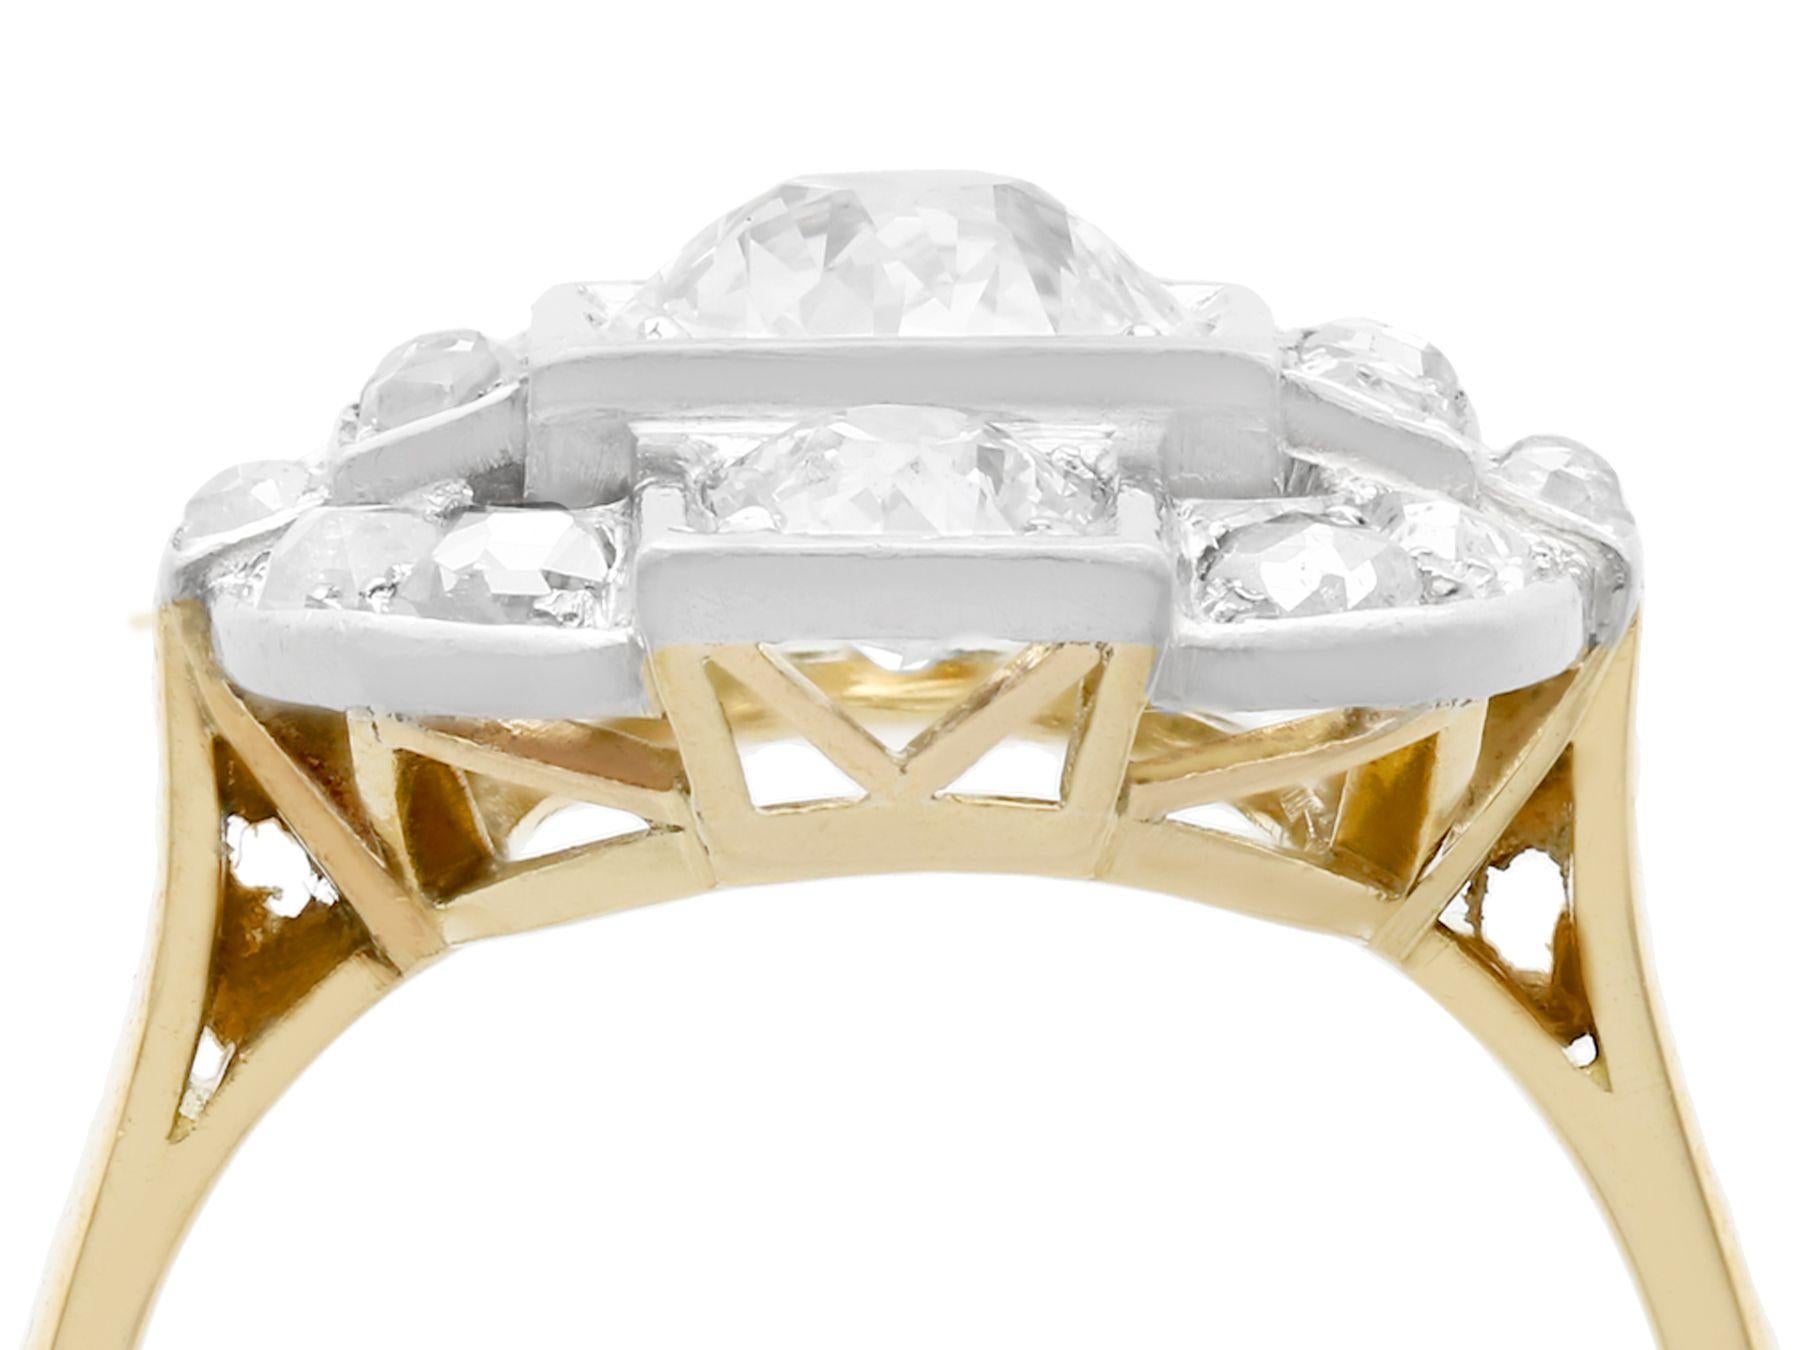 A stunning antique French 2.65 carat diamond and 18 karat yellow gold, platinum set cocktail ring; part of our diverse antique jewelry and estate jewelry collections.

This stunning, fine and impressive antique diamond ring has been crafted in 18k